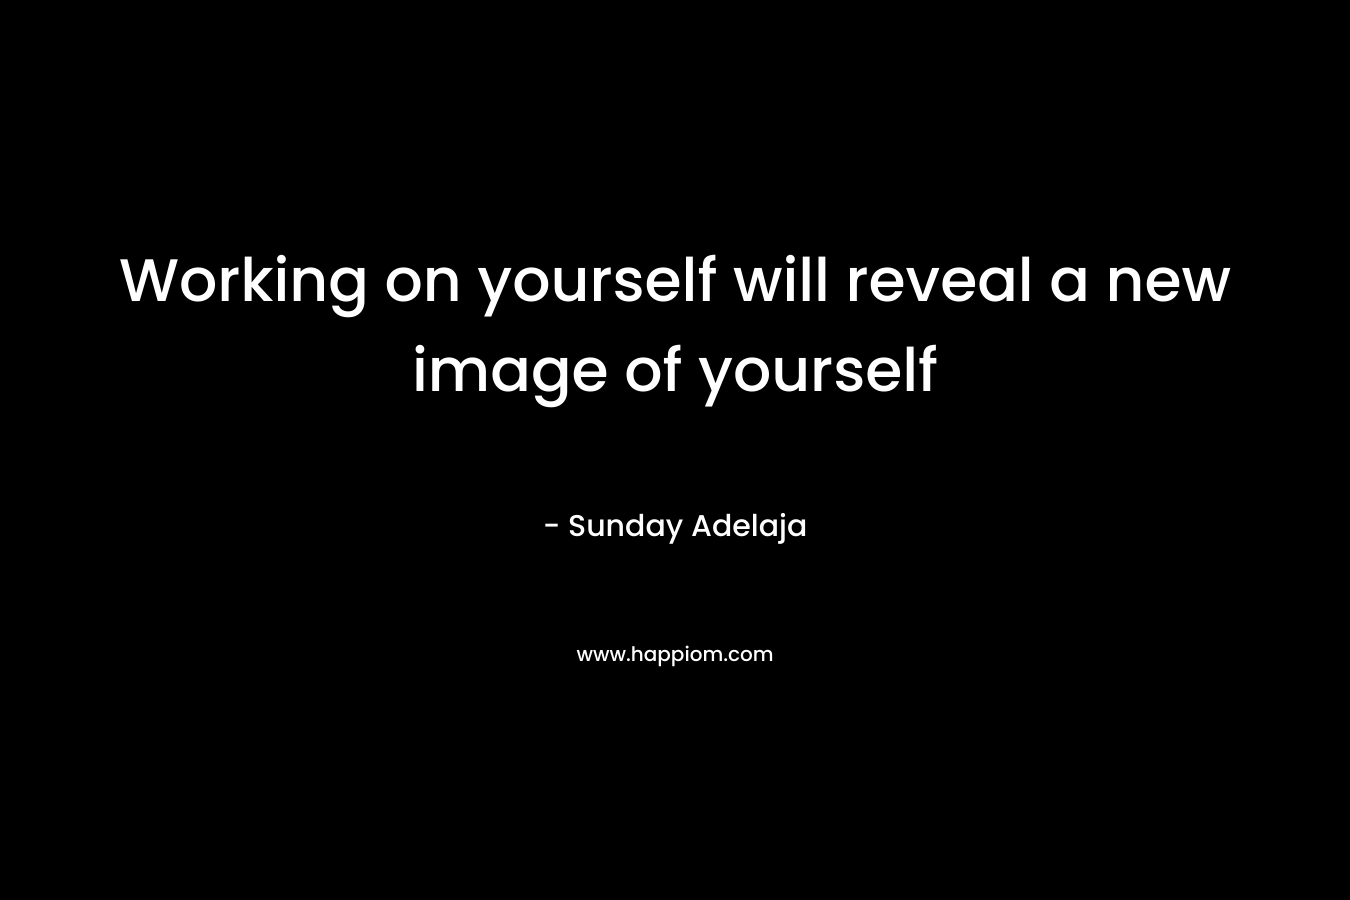 Working on yourself will reveal a new image of yourself